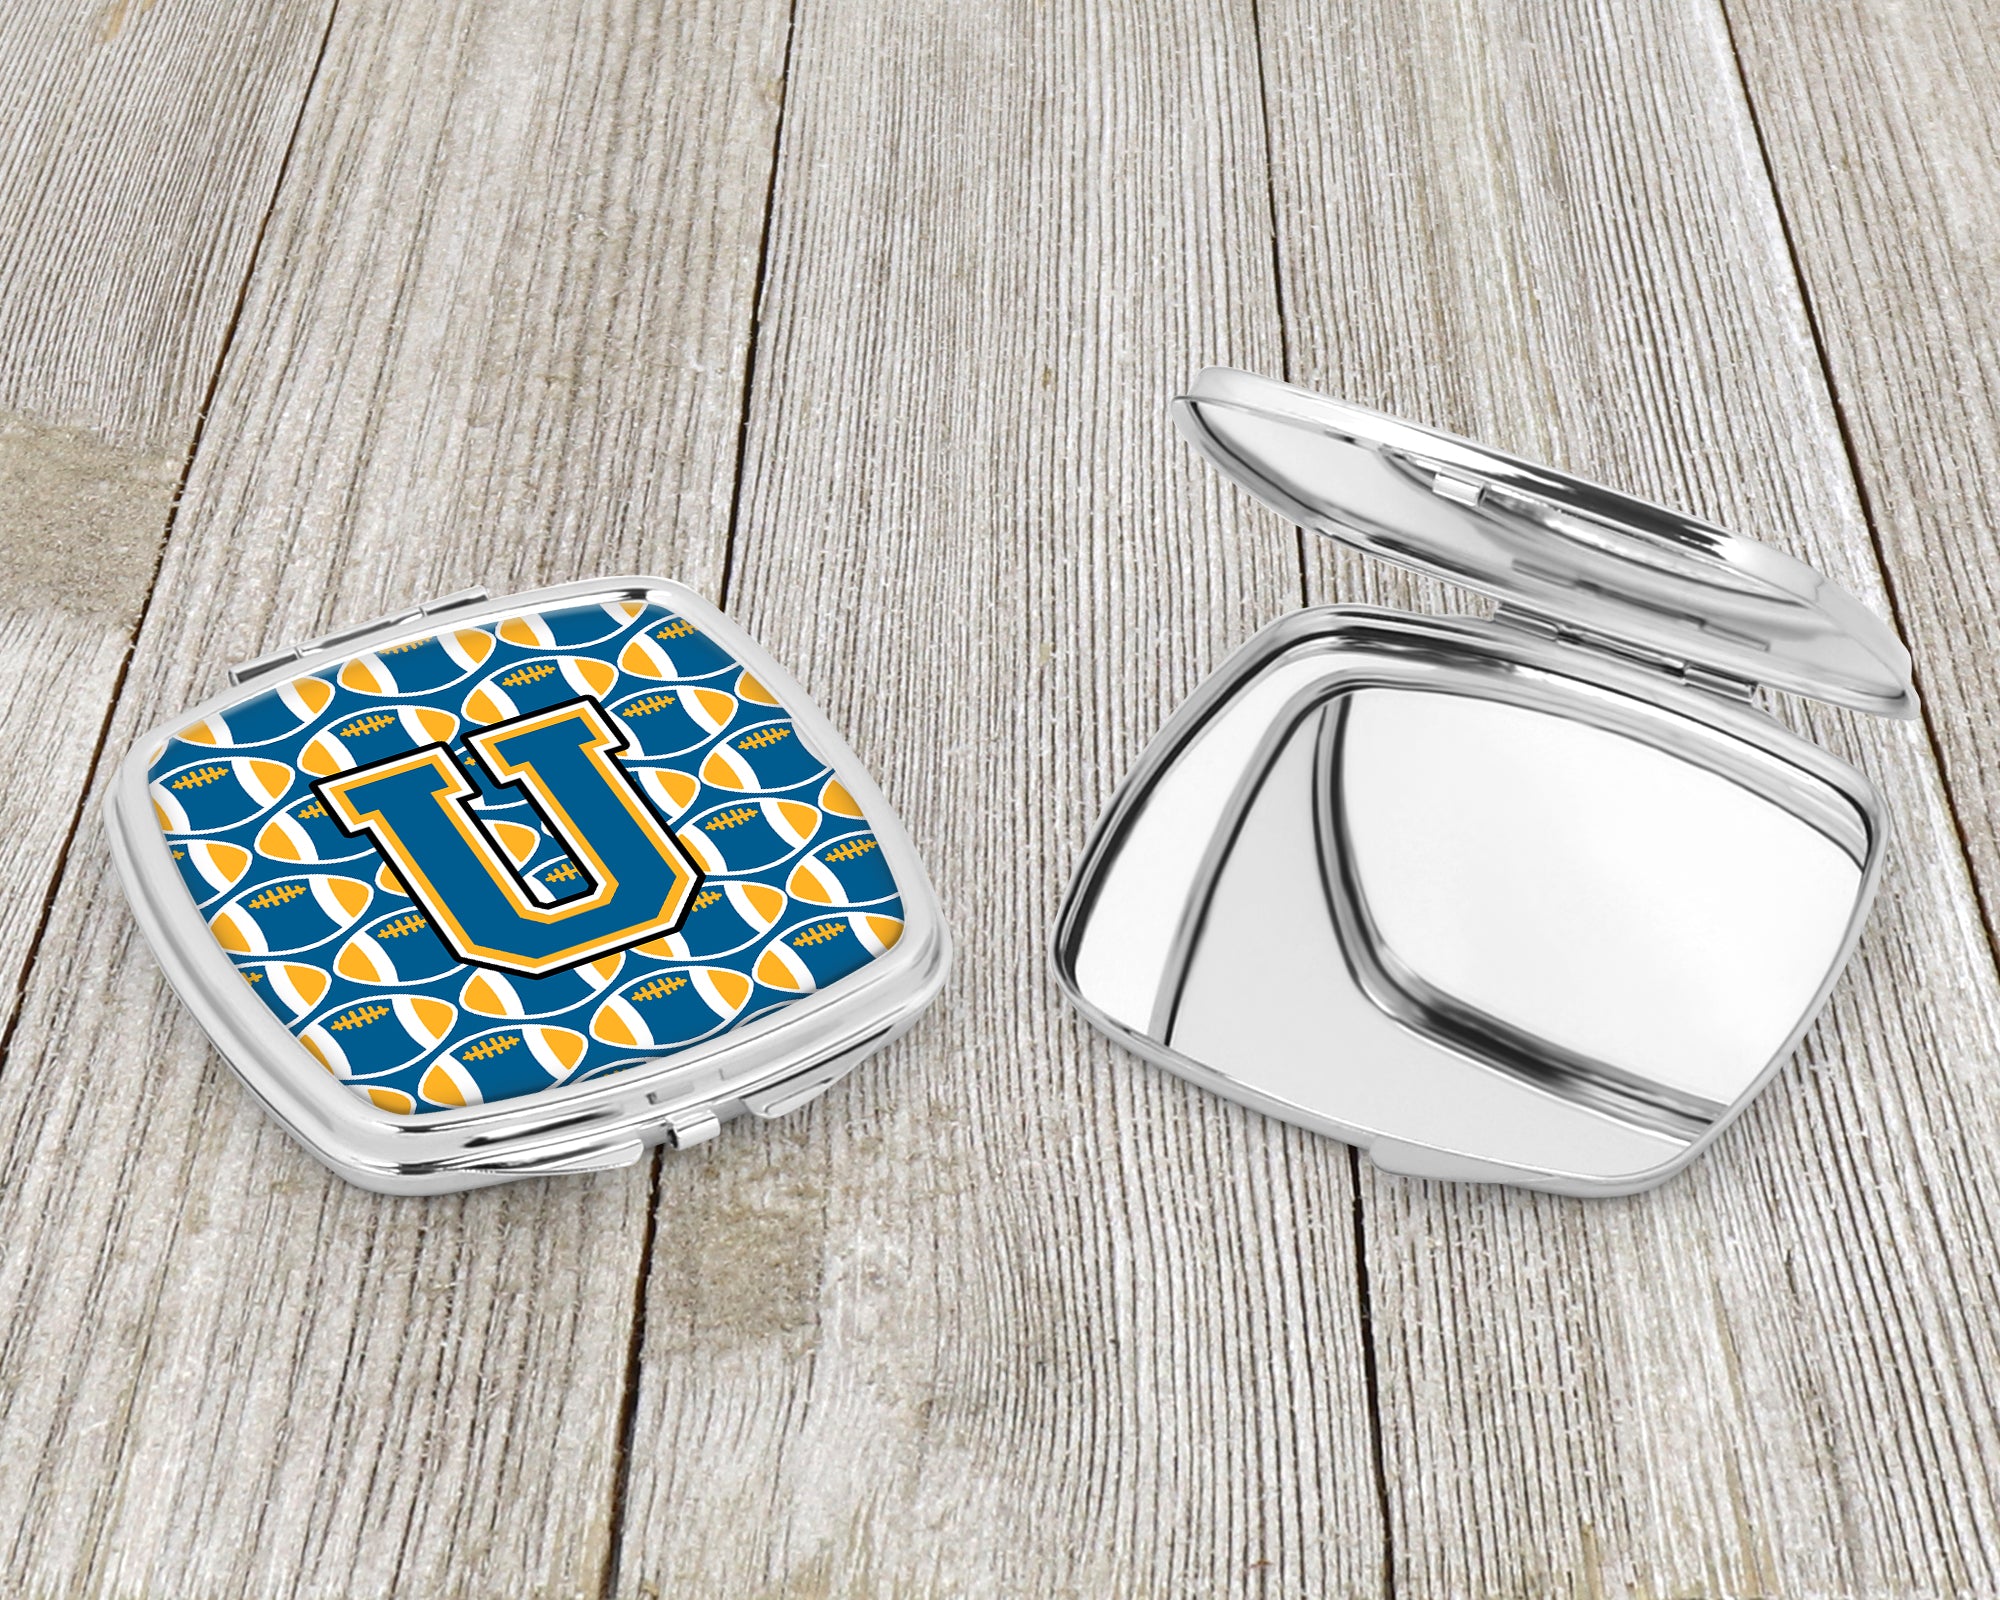 Letter U Football Blue and Gold Compact Mirror CJ1077-USCM